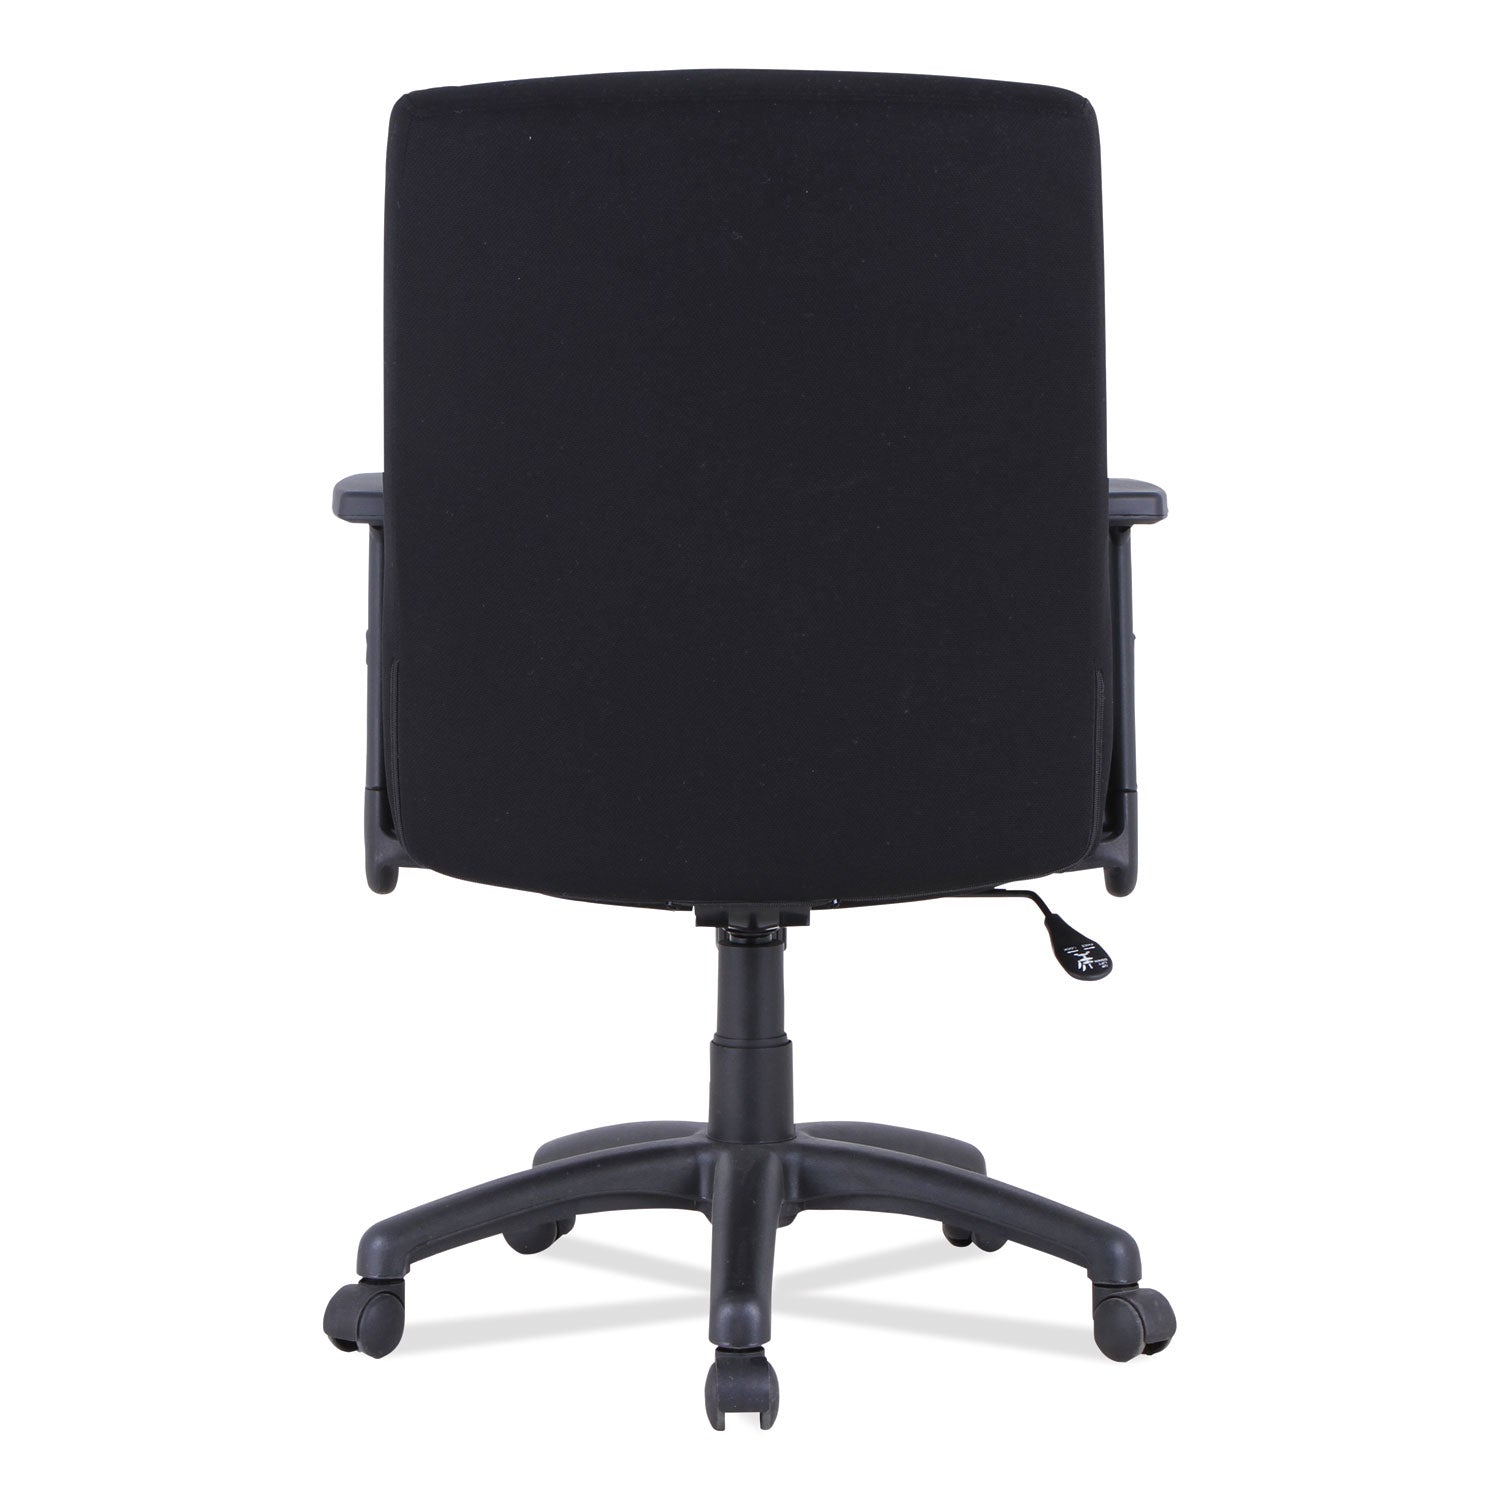 alera-kesson-series-petite-office-chair-supports-up-to-300-lb-1771-to-2165-seat-height-black_aleks4010 - 8